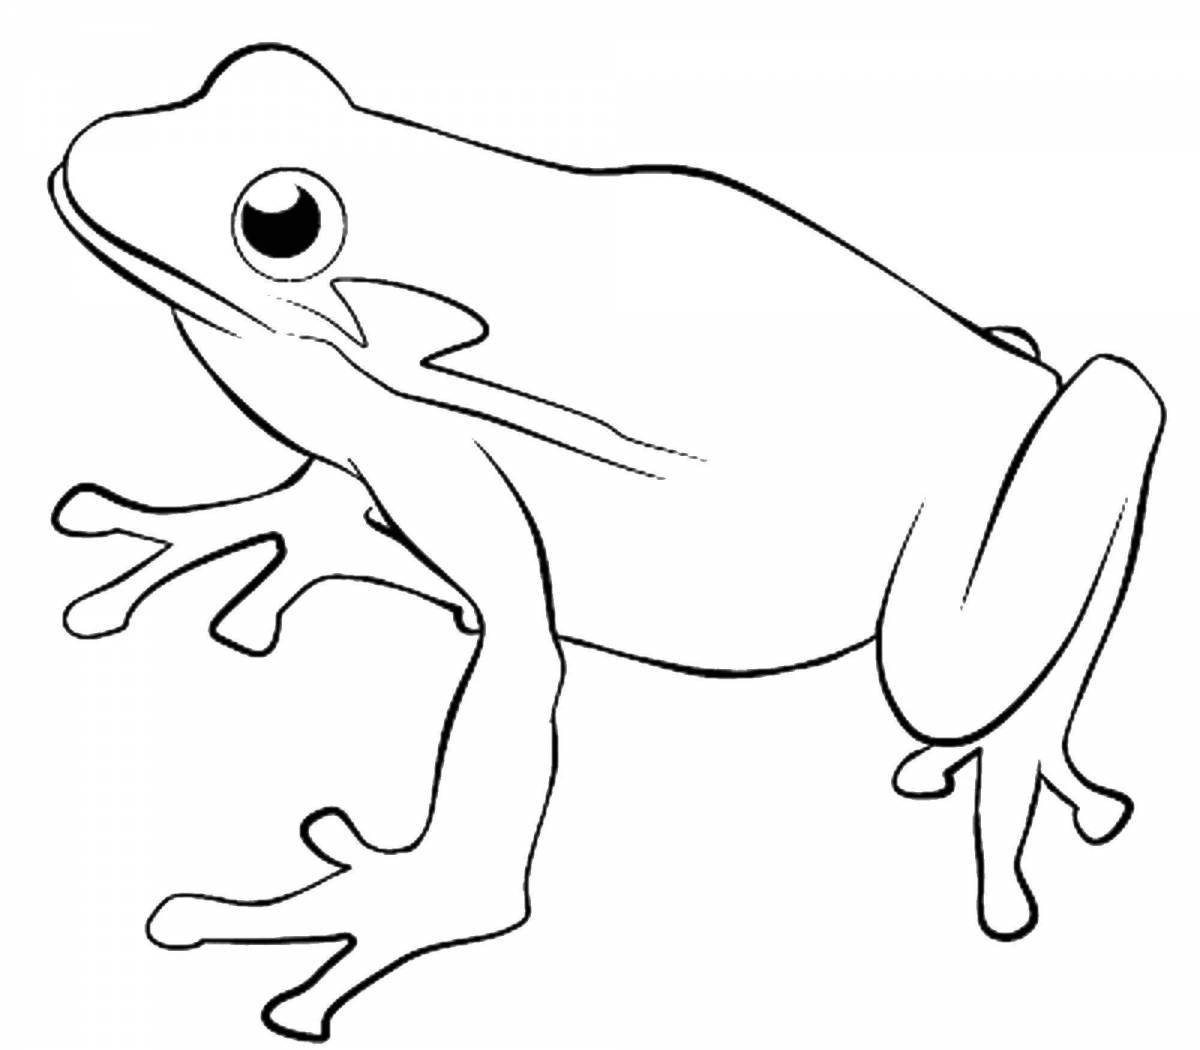 Charming frog coloring page